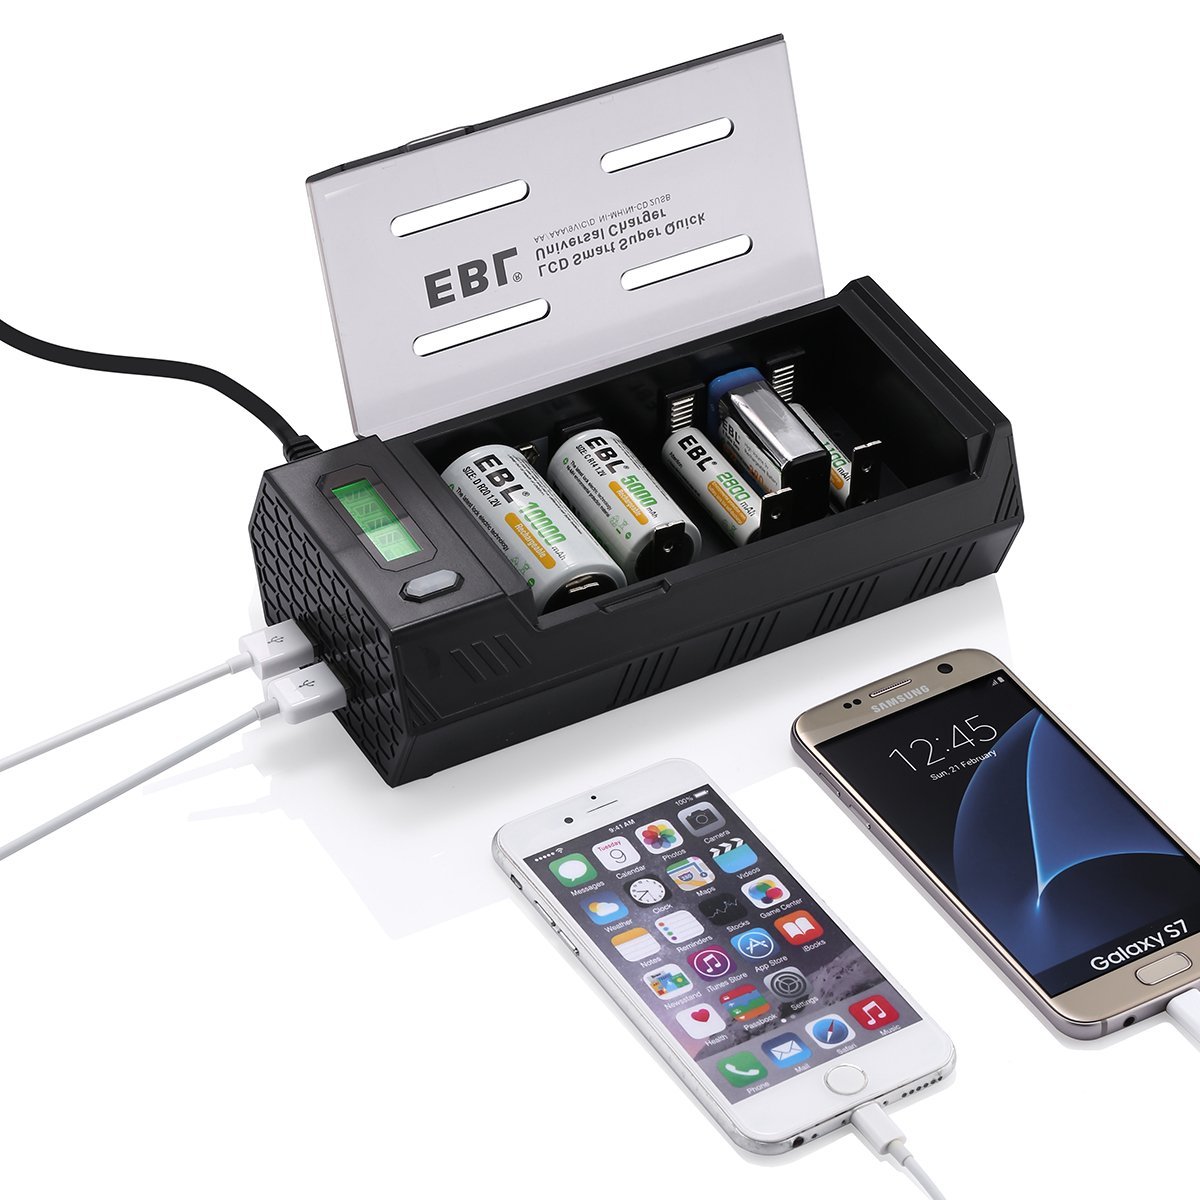 EBL D Size D Rechargeable Batteries (4 Pack, 10000mAh) and Ni-MH Ni-CD AA AAA C D 9V Battery Charger with 2 USB Port